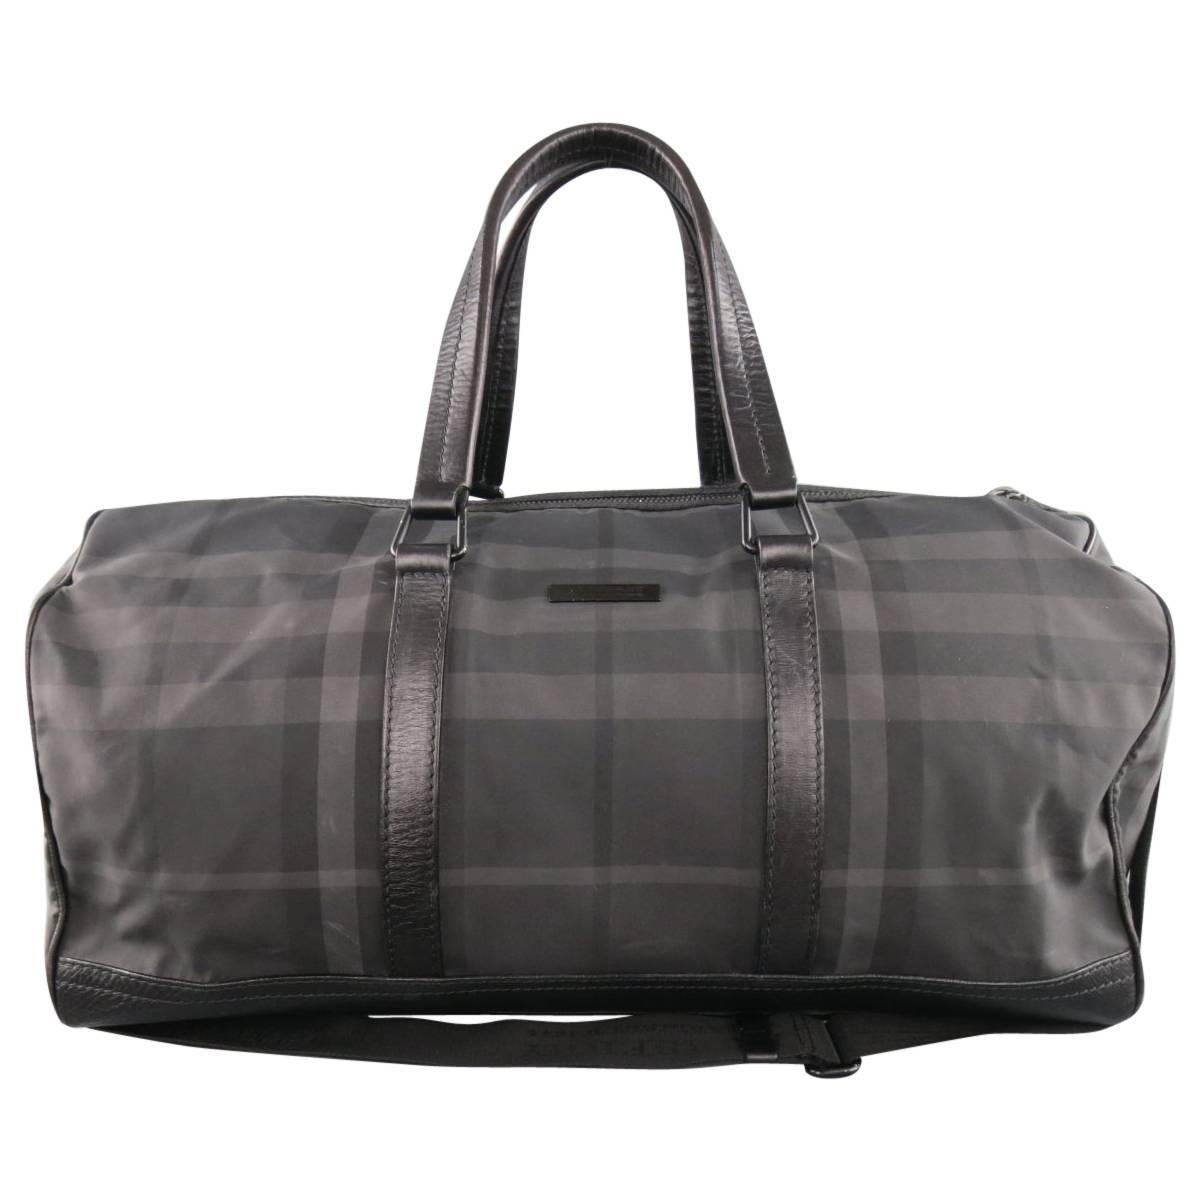 burberry large washed leather duffle bag